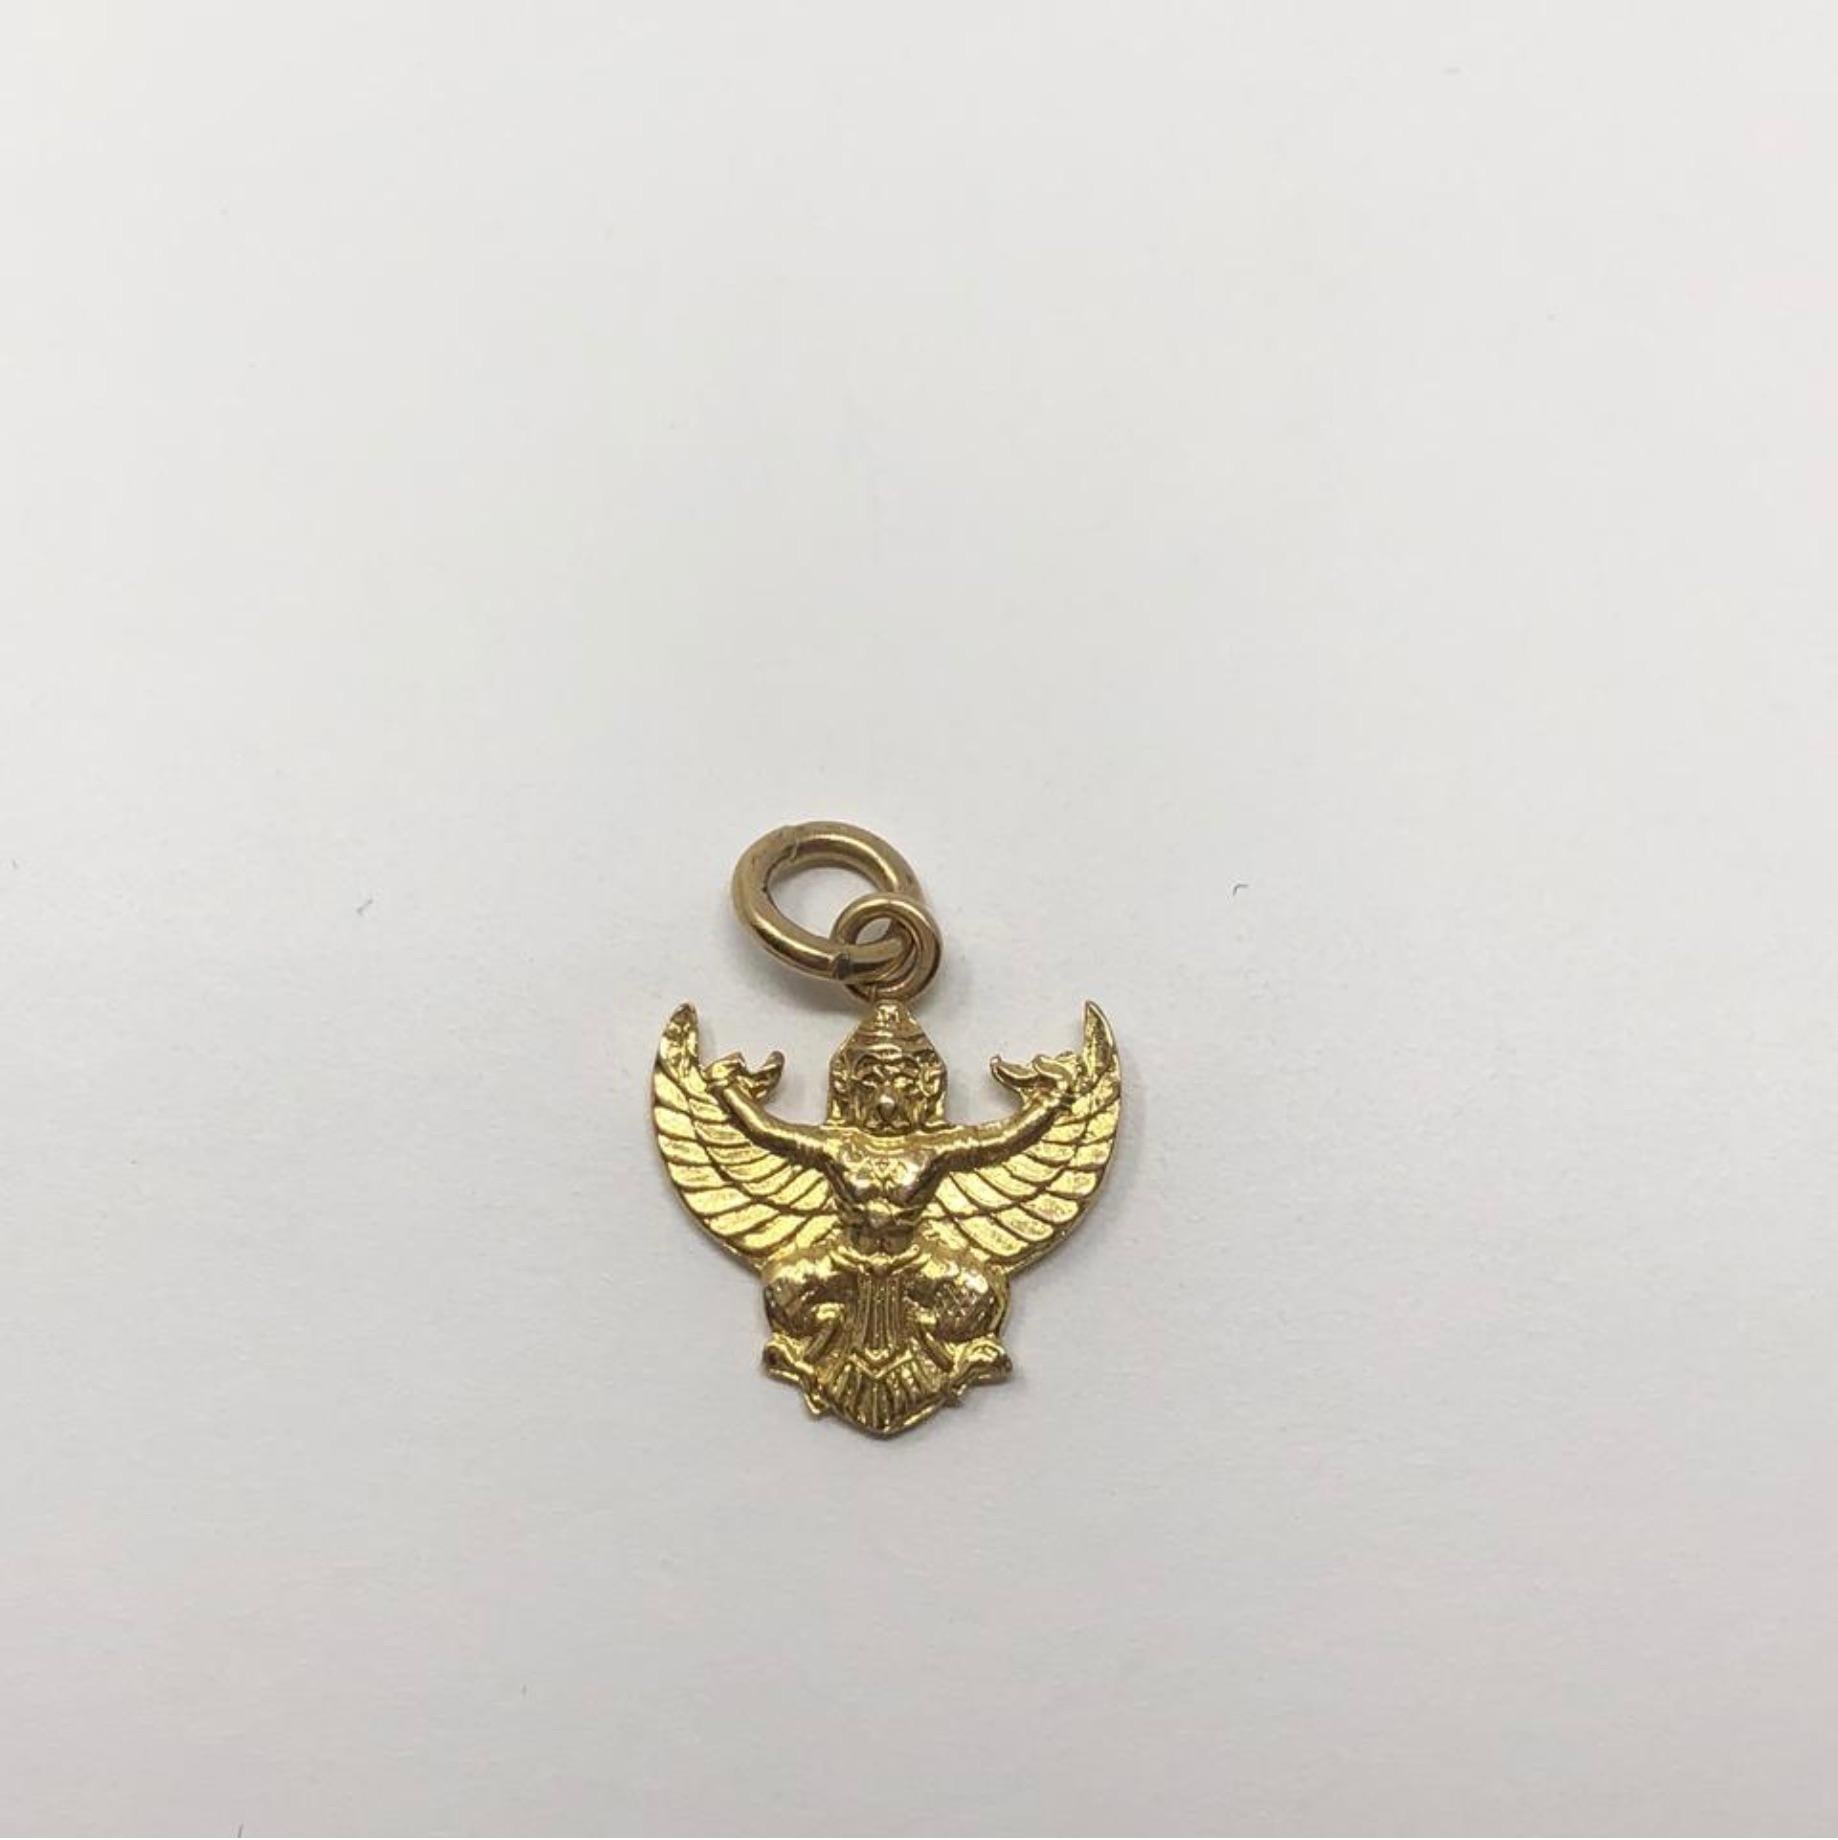 Vintage 14 Karat Gold Katchina Dancer with Wings Spread Pendent Charm In Excellent Condition For Sale In Saint Charles, IL